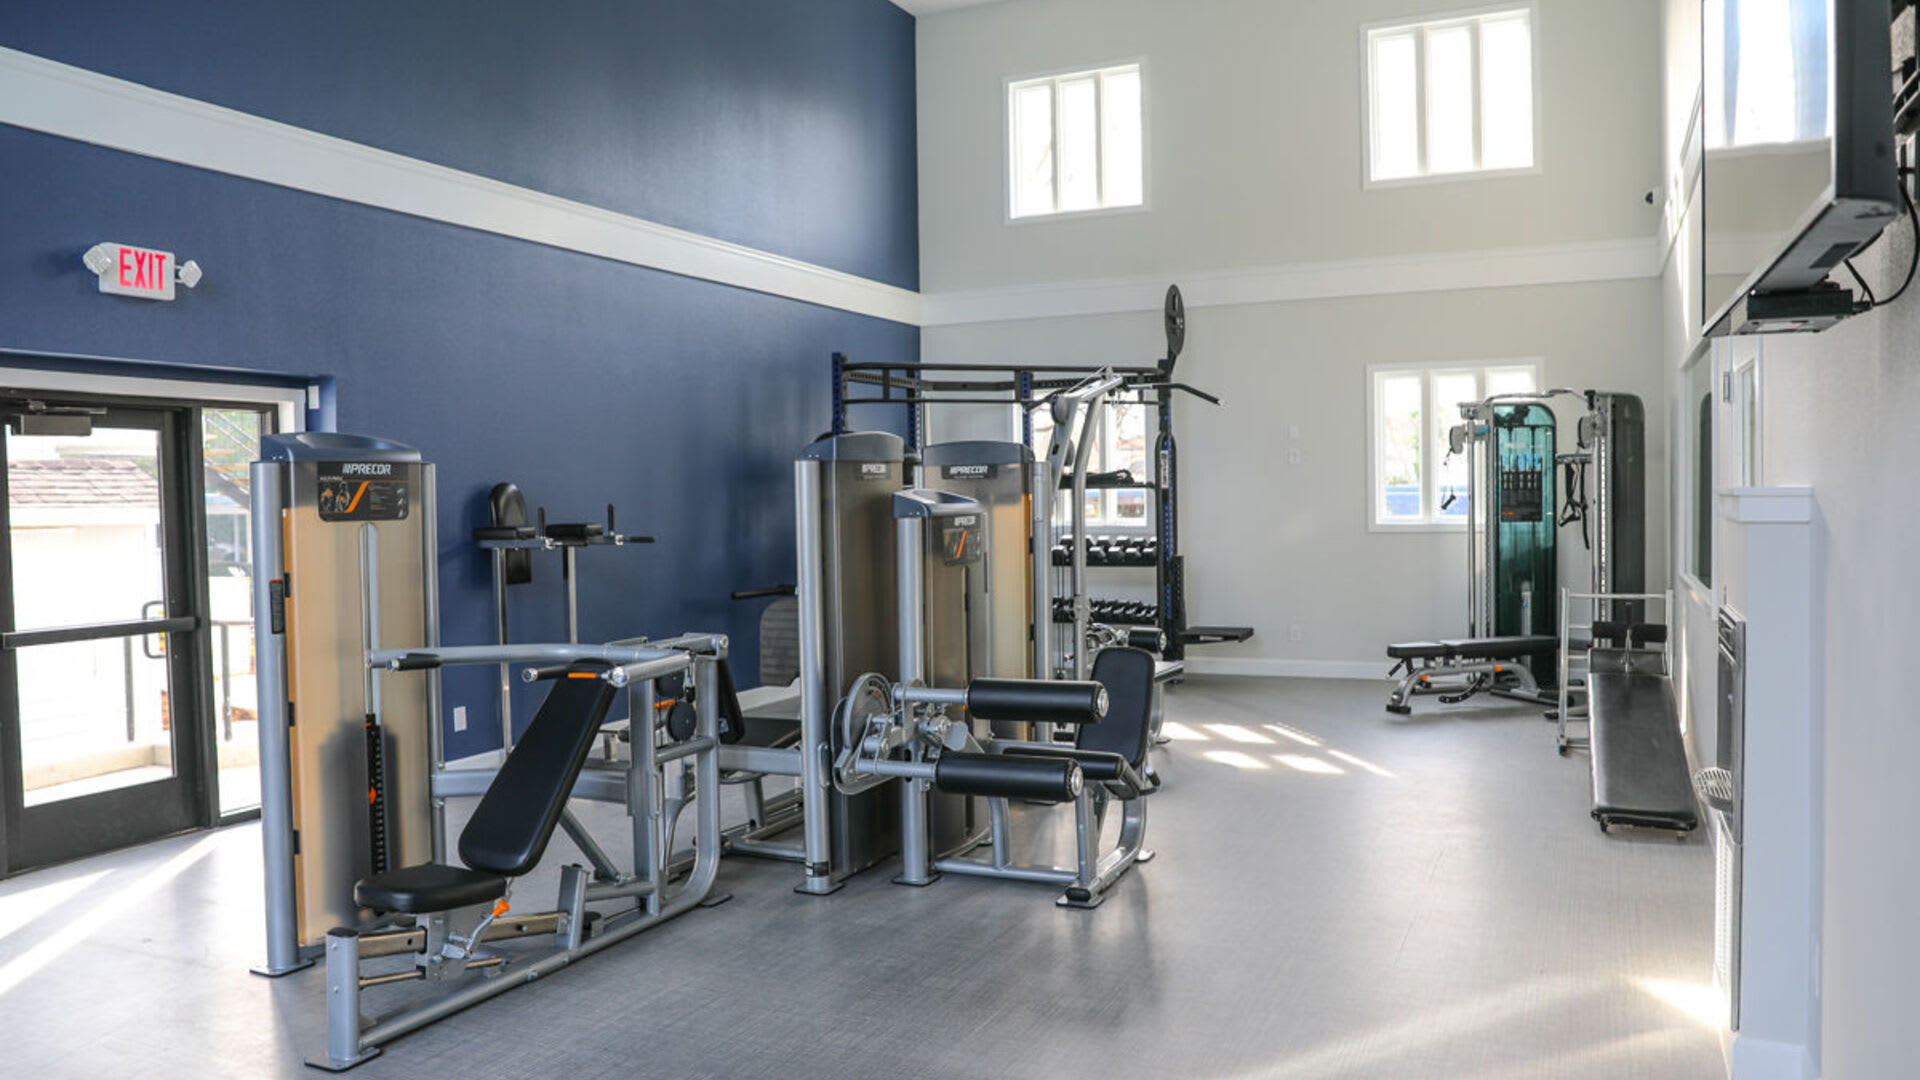 Fitness center at Salishan Apartments in Citrus Heights, California